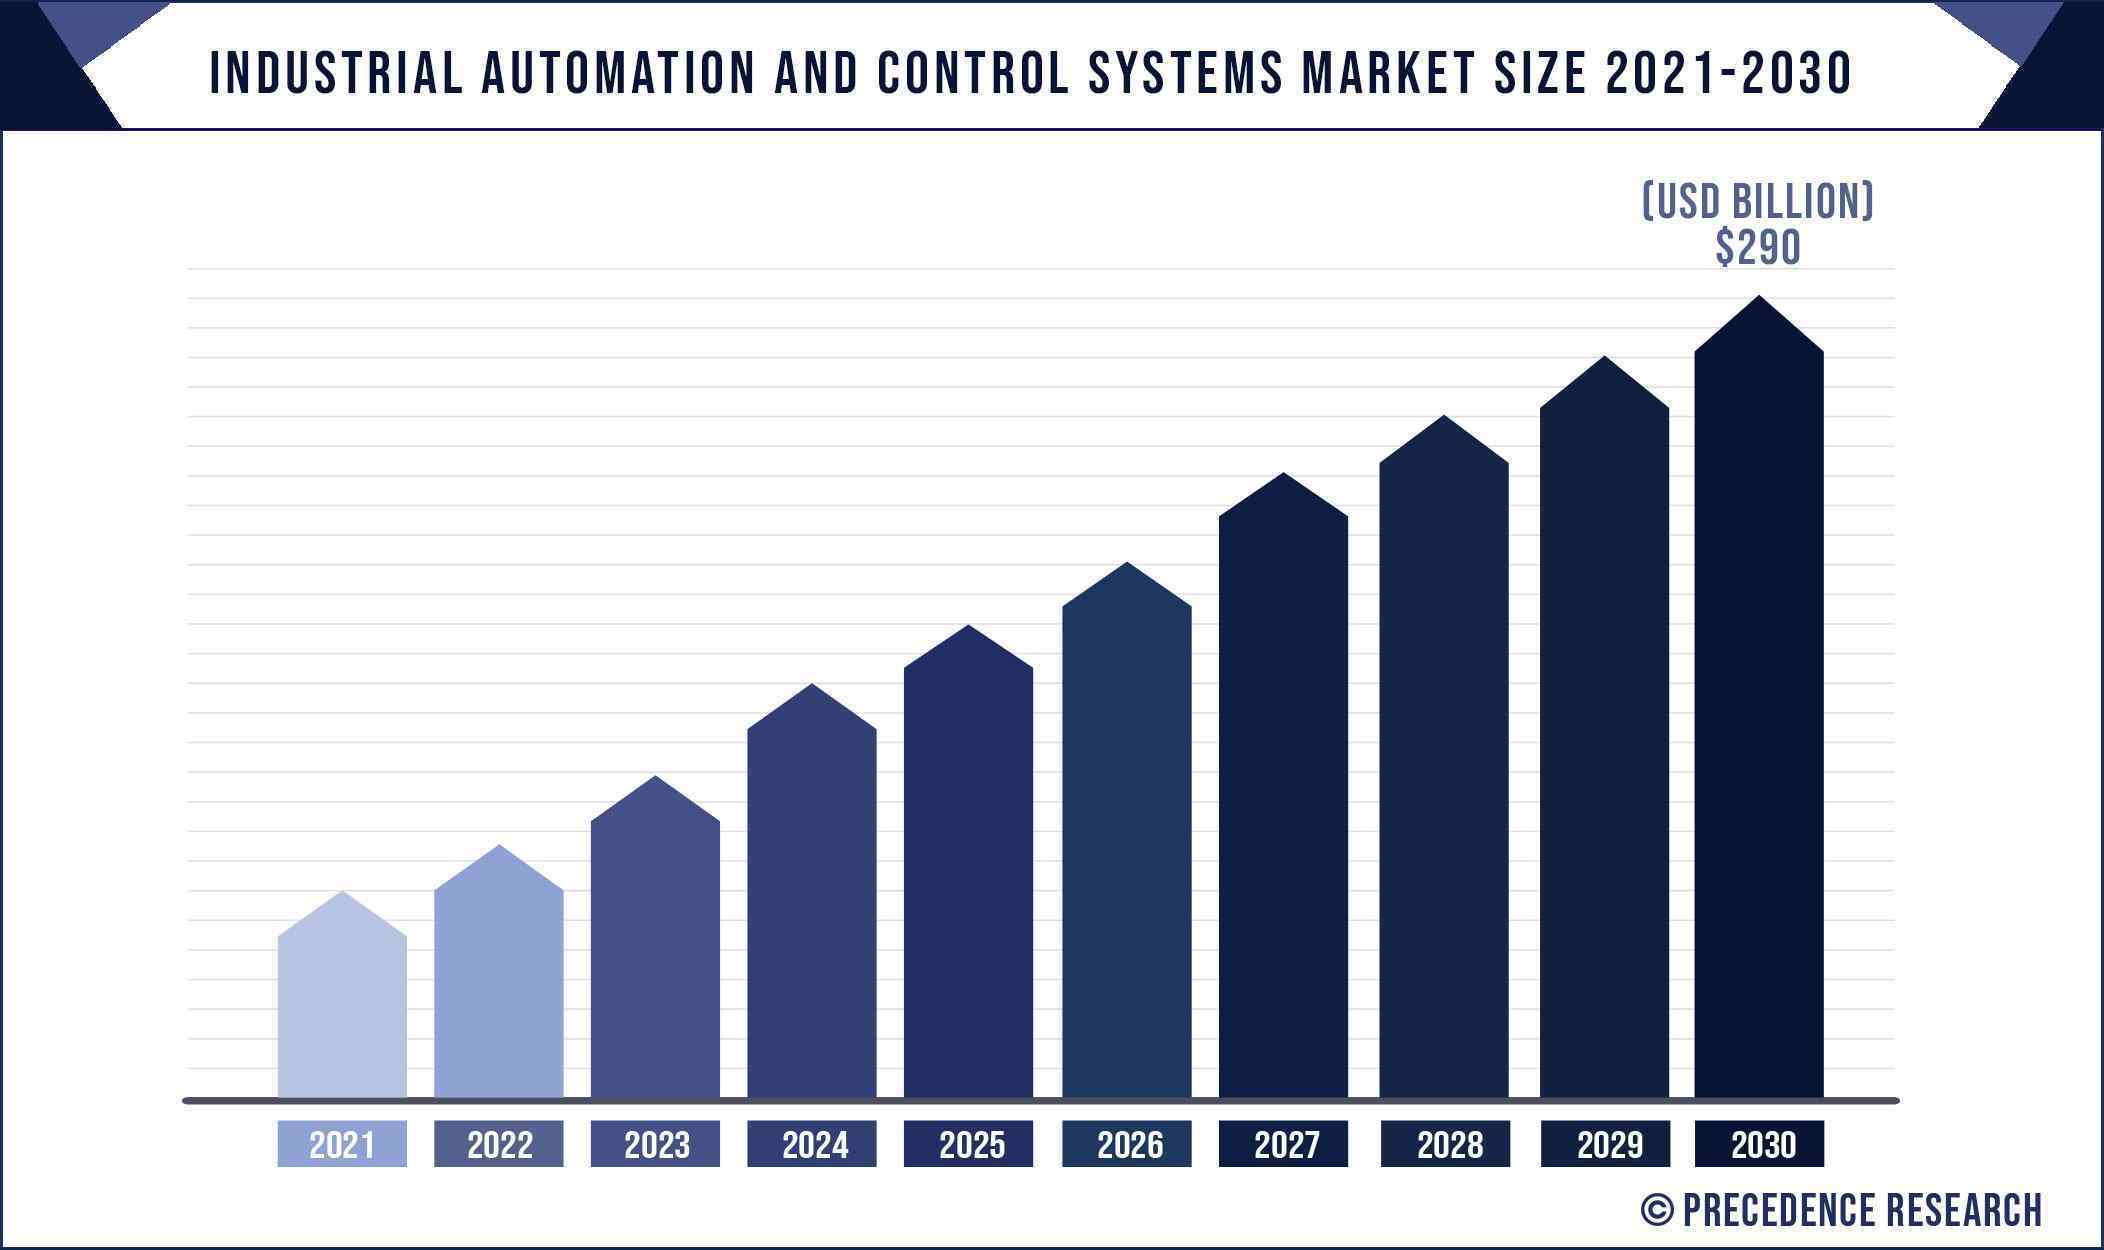 Industrial Automation and Control Systems Market Size 2021 to 2030